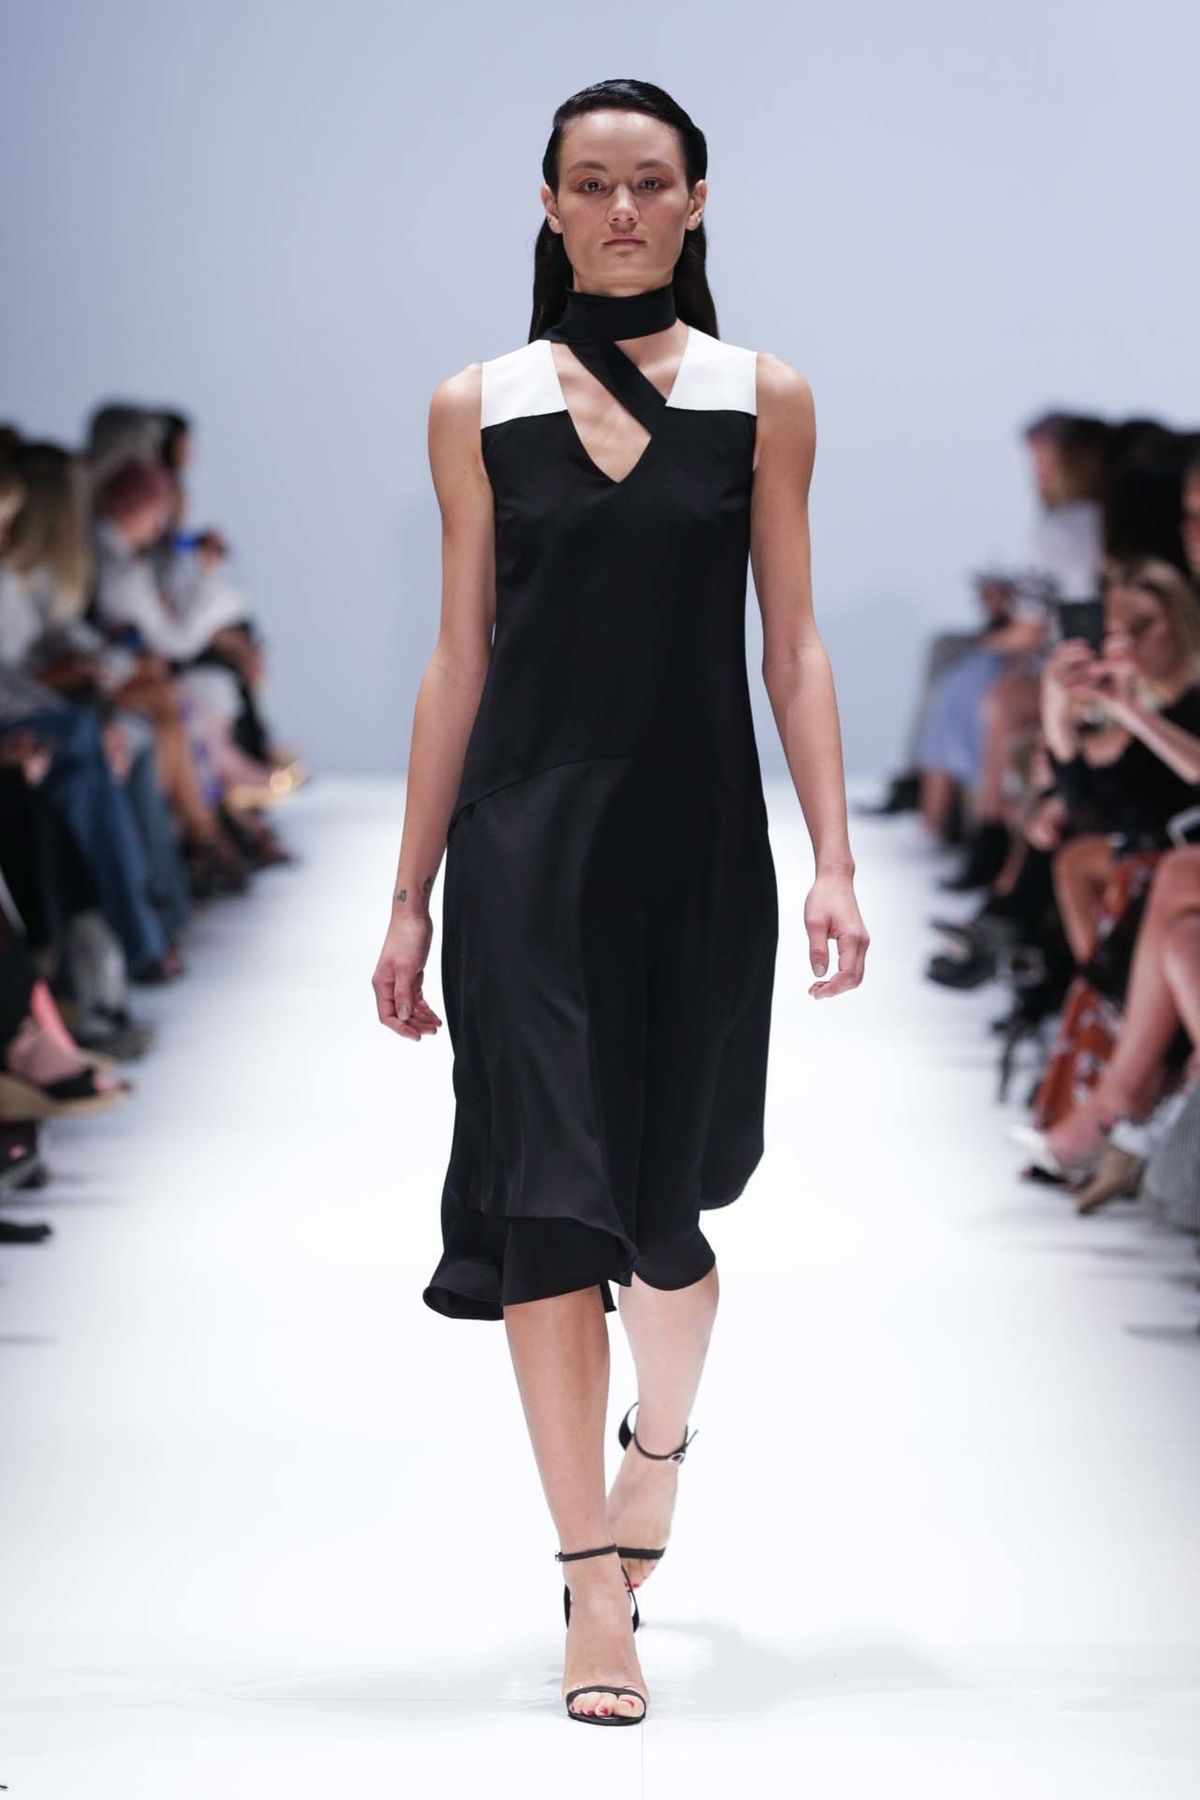 Buy your tickets to attend a Vogue fashion show at Melbourne's VAMFF ...